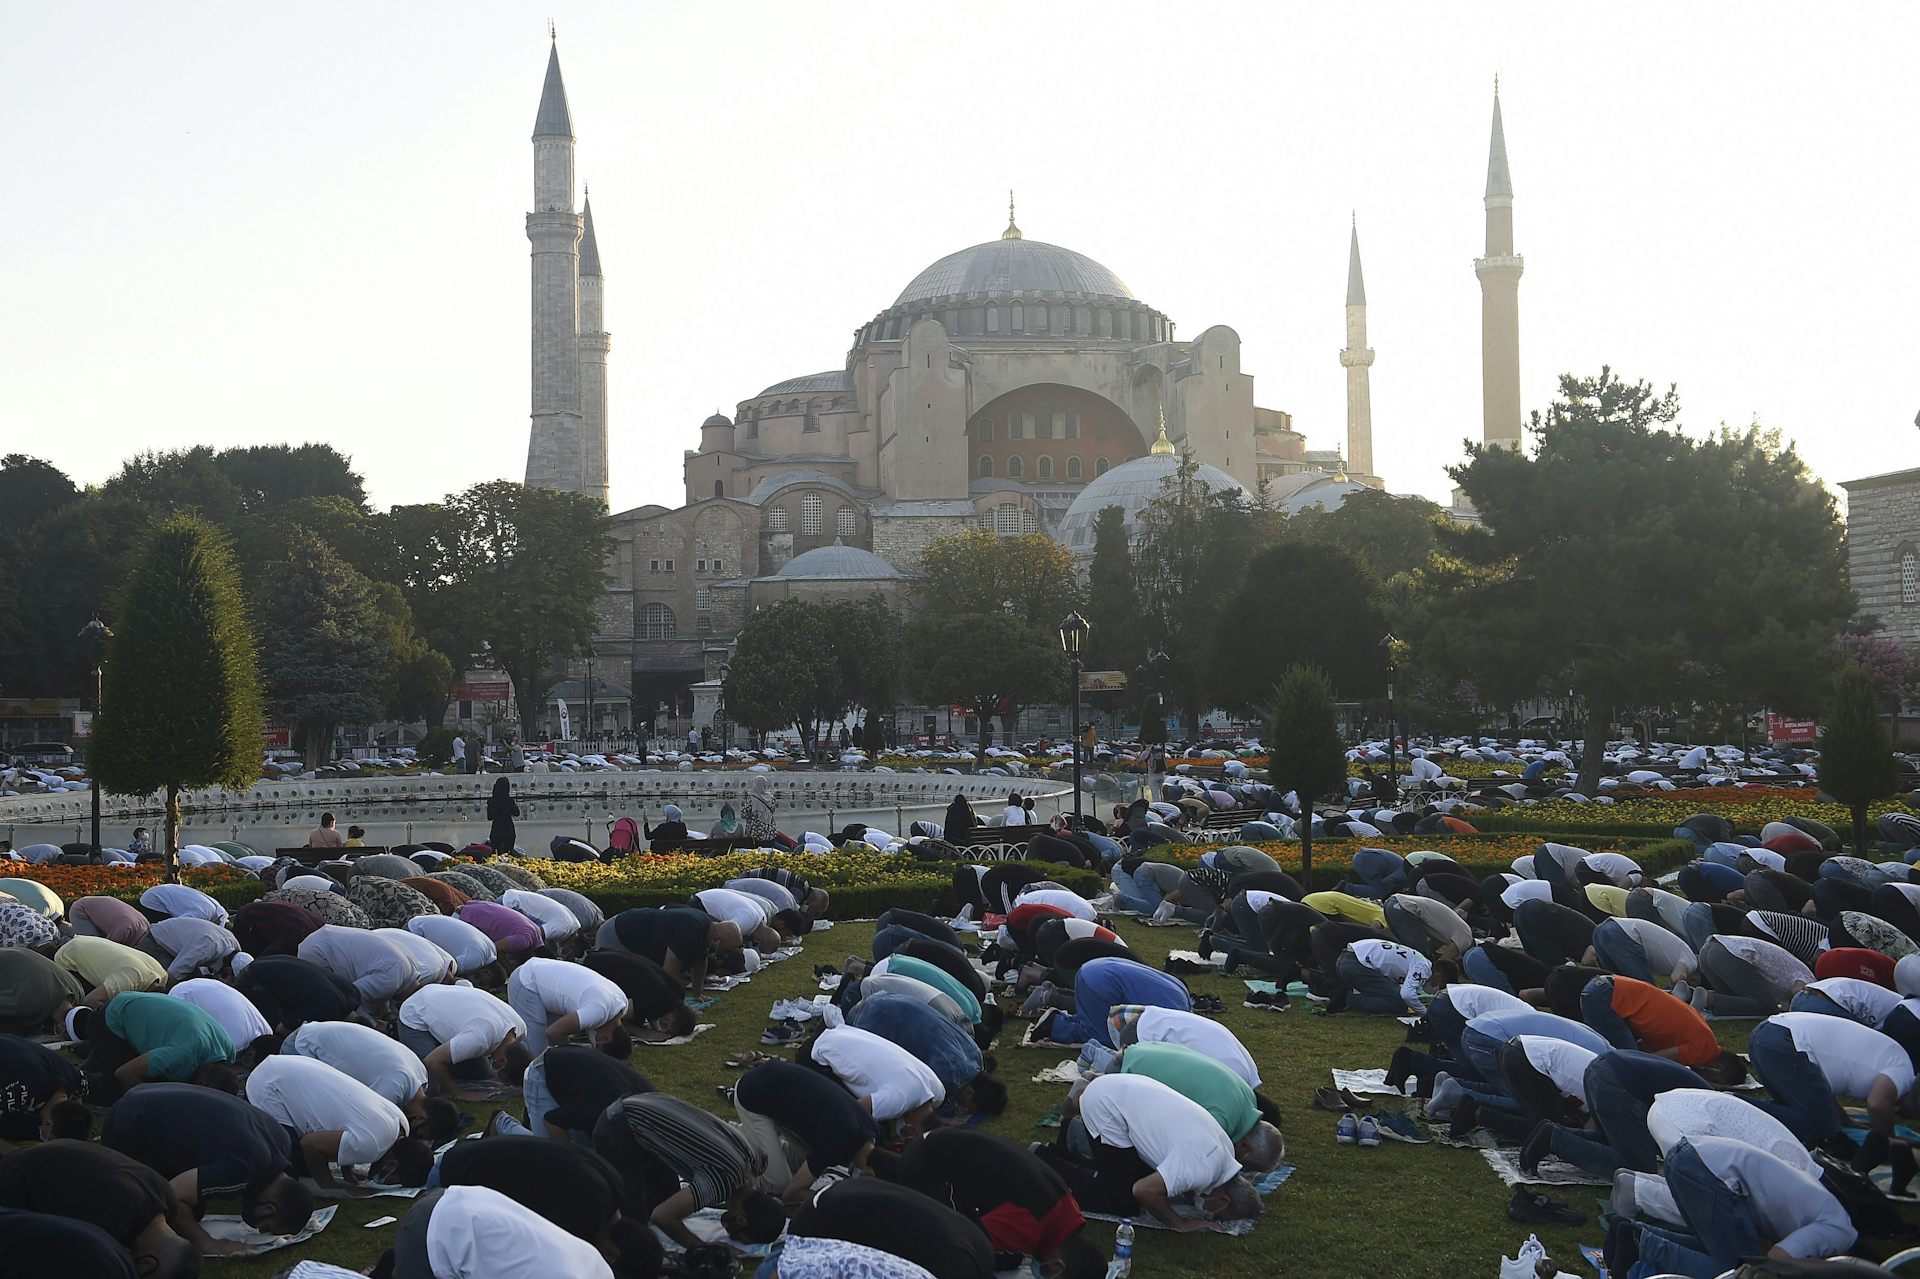 hagia sophia controversy goes beyond muslim christian tensions to treatment of paganism